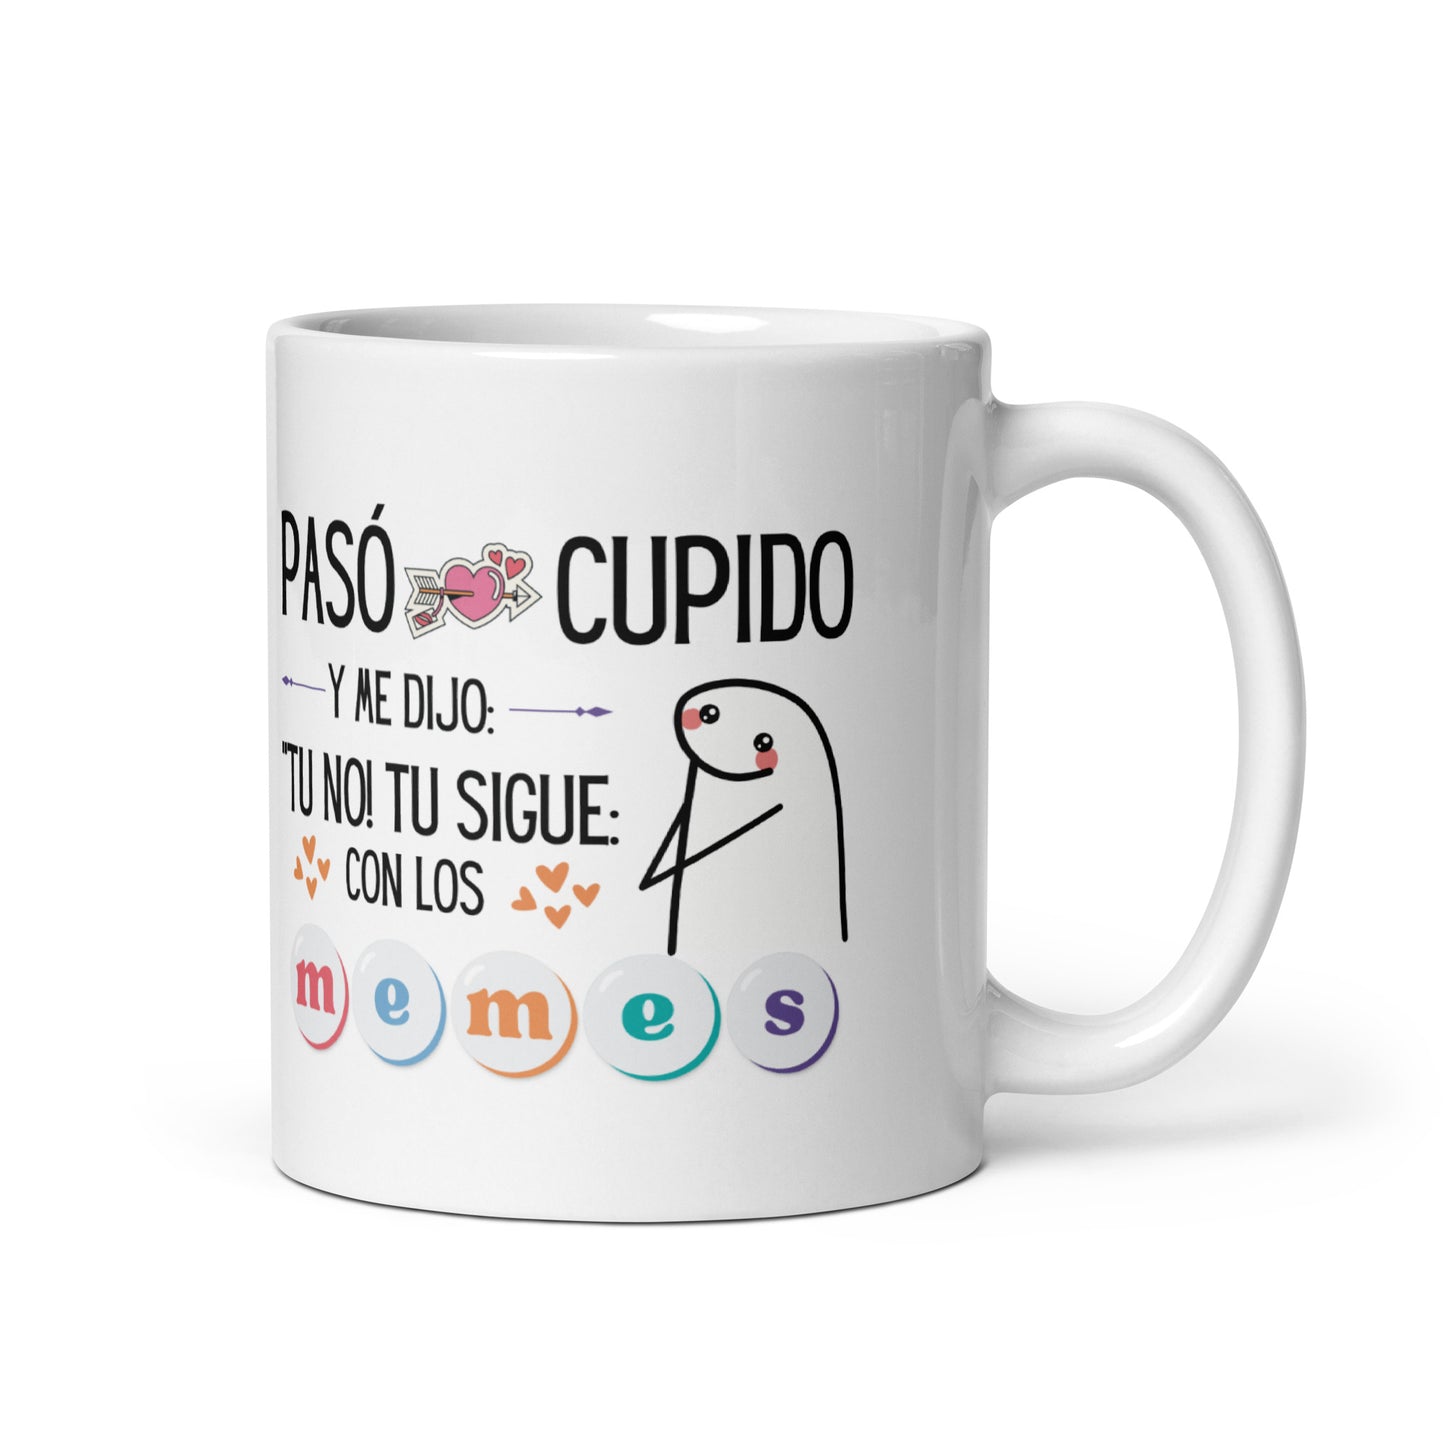 Flork Cupid passed and said to me: Not you! You Keep With The Memes mug